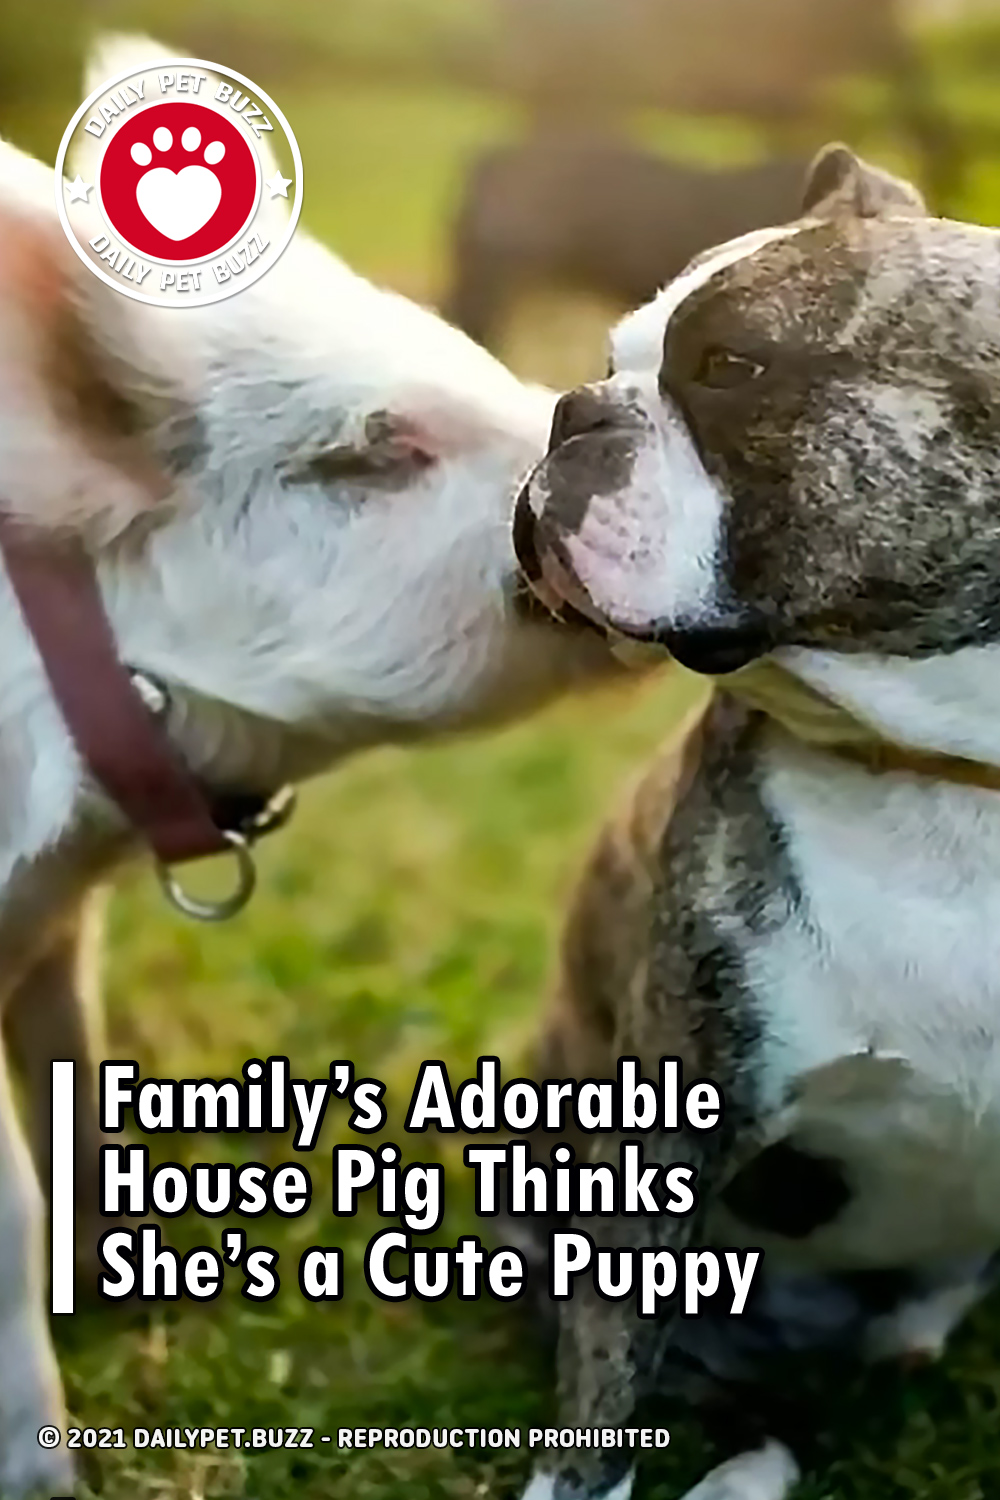 Family’s Adorable House Pig Thinks She’s a Cute Puppy